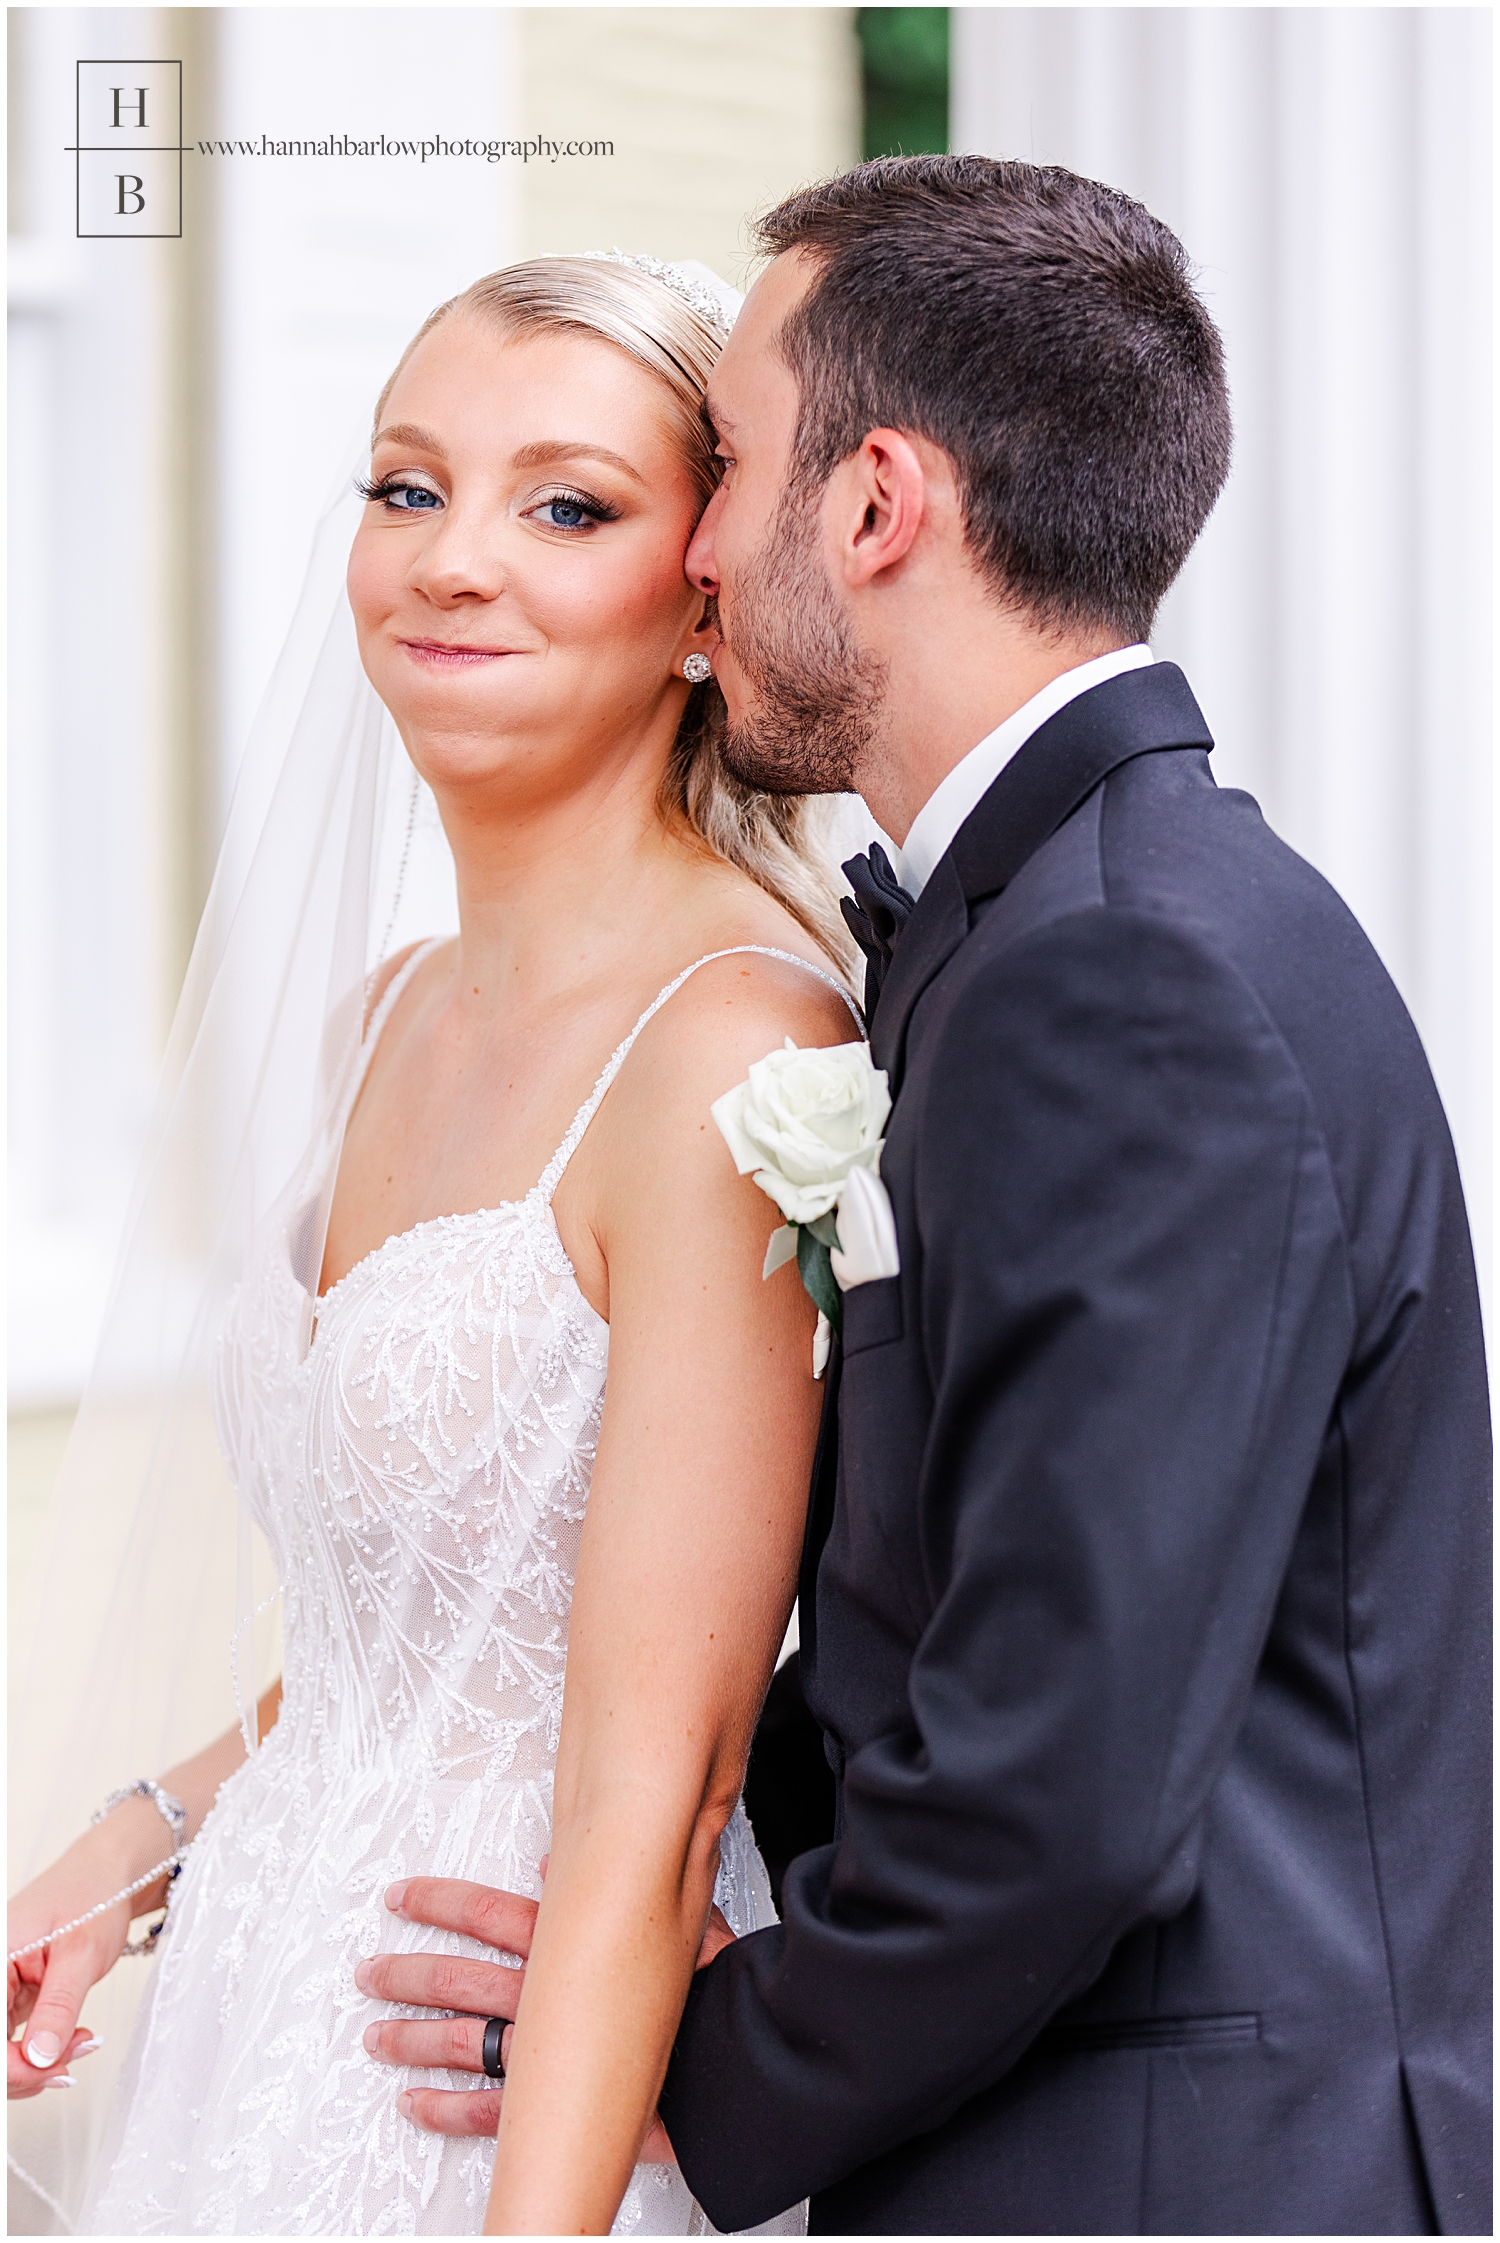 Bride makes funny face puffing out cheeks while groom snuggles with her.